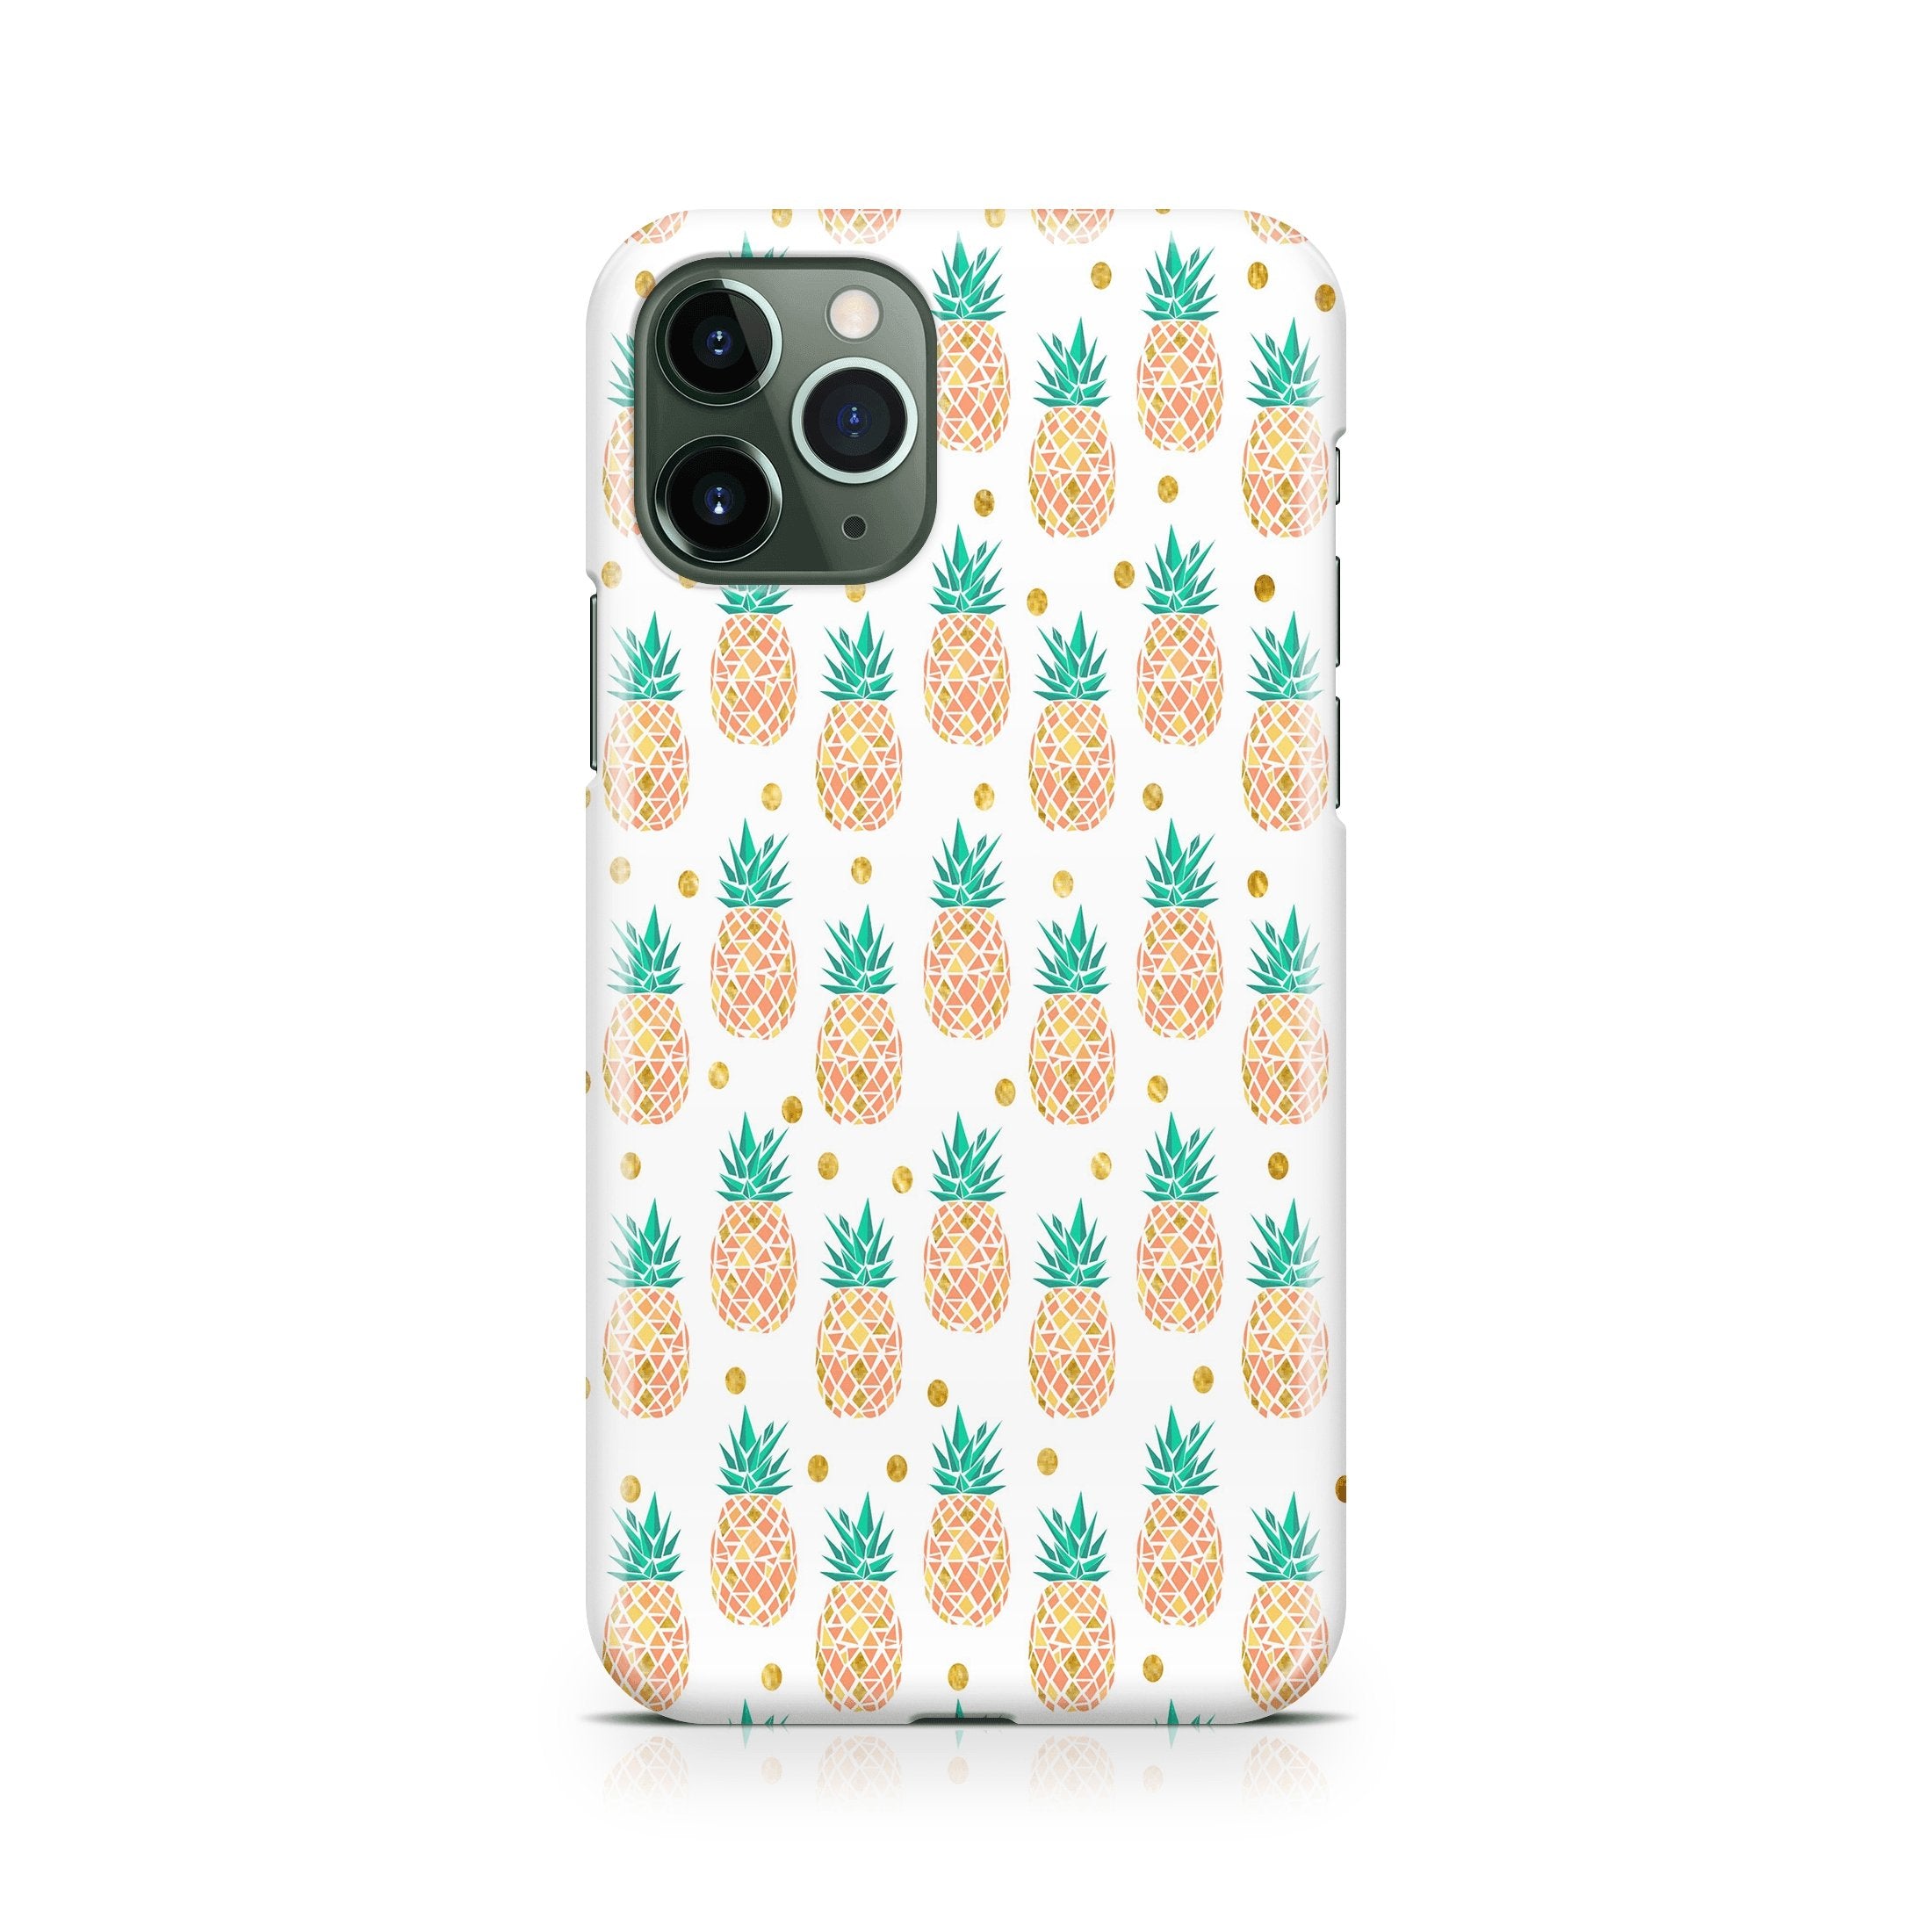 Pineapple Pineapple - iPhone phone case designs by CaseSwagger